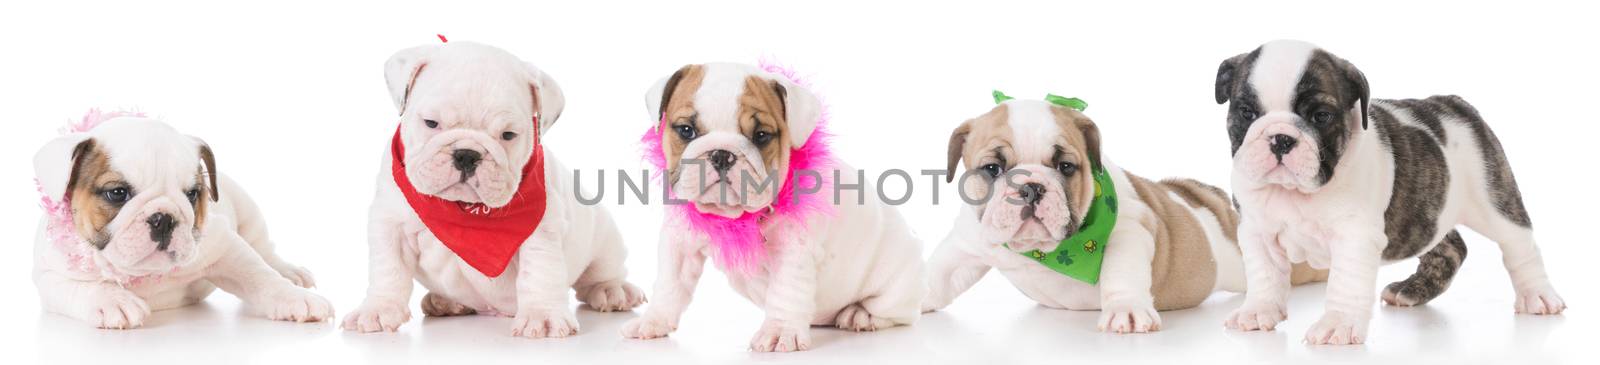 litter of five english bulldog puppies isolated on white background